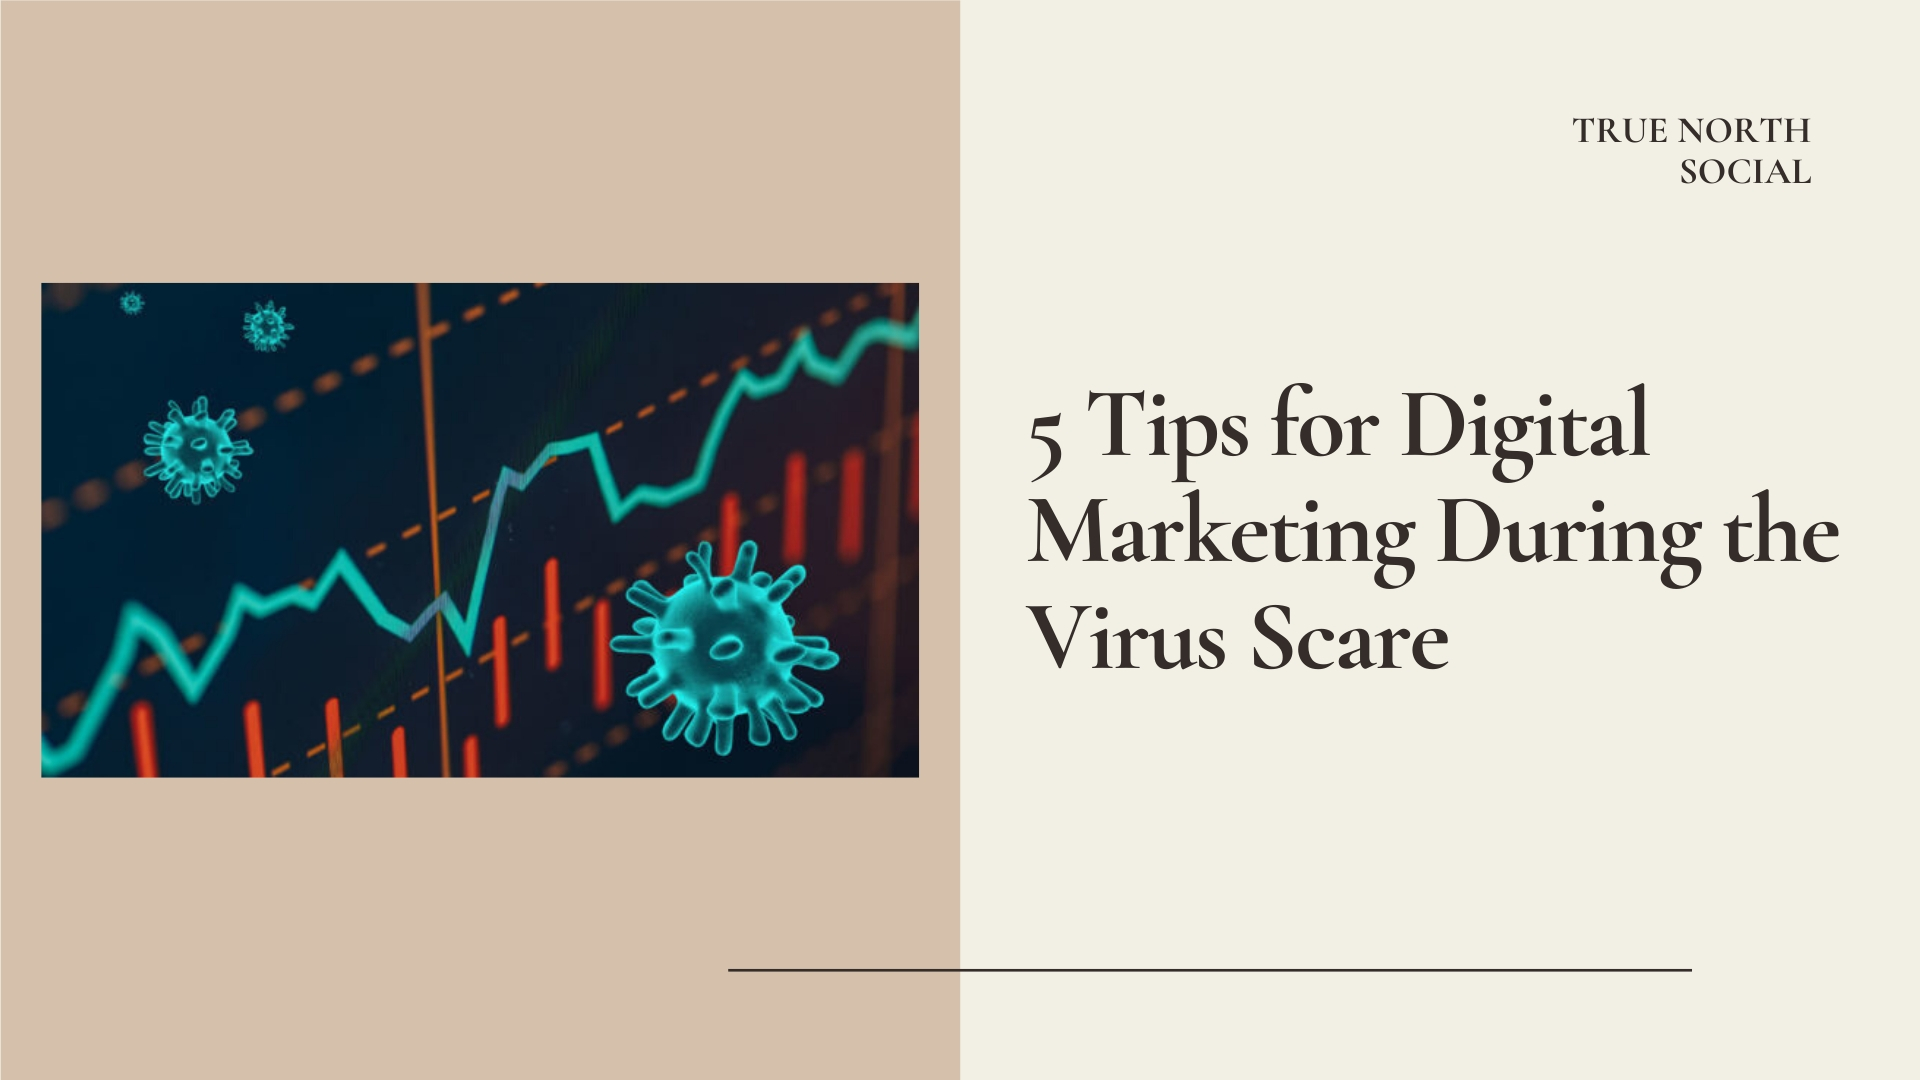 5 Tips for Digital Marketing During the Virus Scare